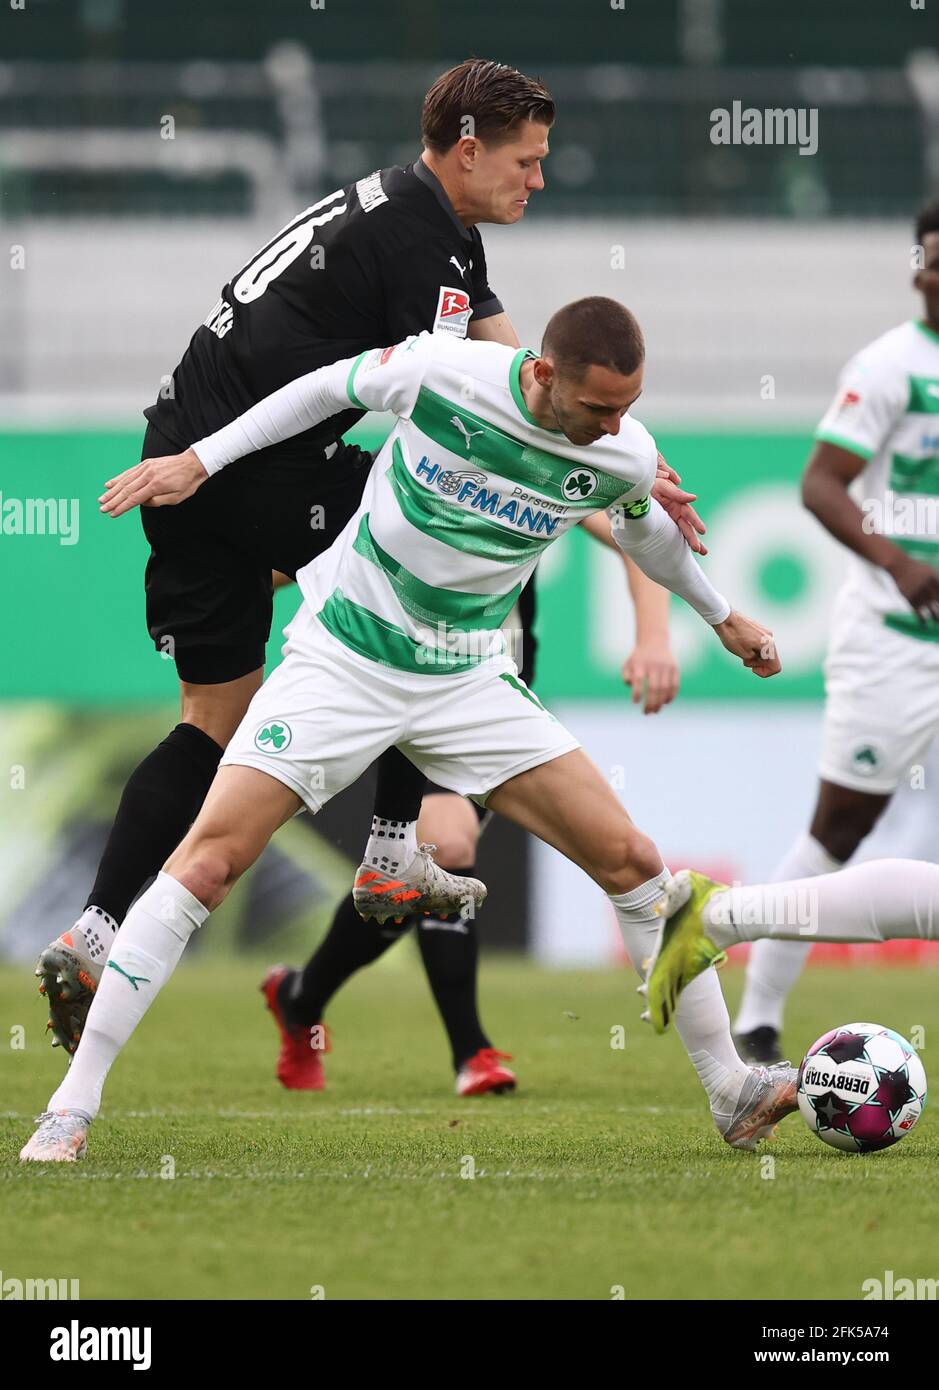 28 April 2021, Bavaria, Fürth: Football: 2. Bundesliga, SpVgg Greuther Fürth - SV Sandhausen, Matchday 28, at Sportpark Ronhof Thomas Sommer. Fürth's Branimir Hrgota (centre) fights for the ball with SV Sandhausen's Kevin Behrens (left). Photo: Daniel Karmann/dpa - IMPORTANT NOTE: In accordance with the regulations of the DFL Deutsche Fußball Liga and/or the DFB Deutscher Fußball-Bund, it is prohibited to use or have used photographs taken in the stadium and/or of the match in the form of sequence pictures and/or video-like photo series. Stock Photo